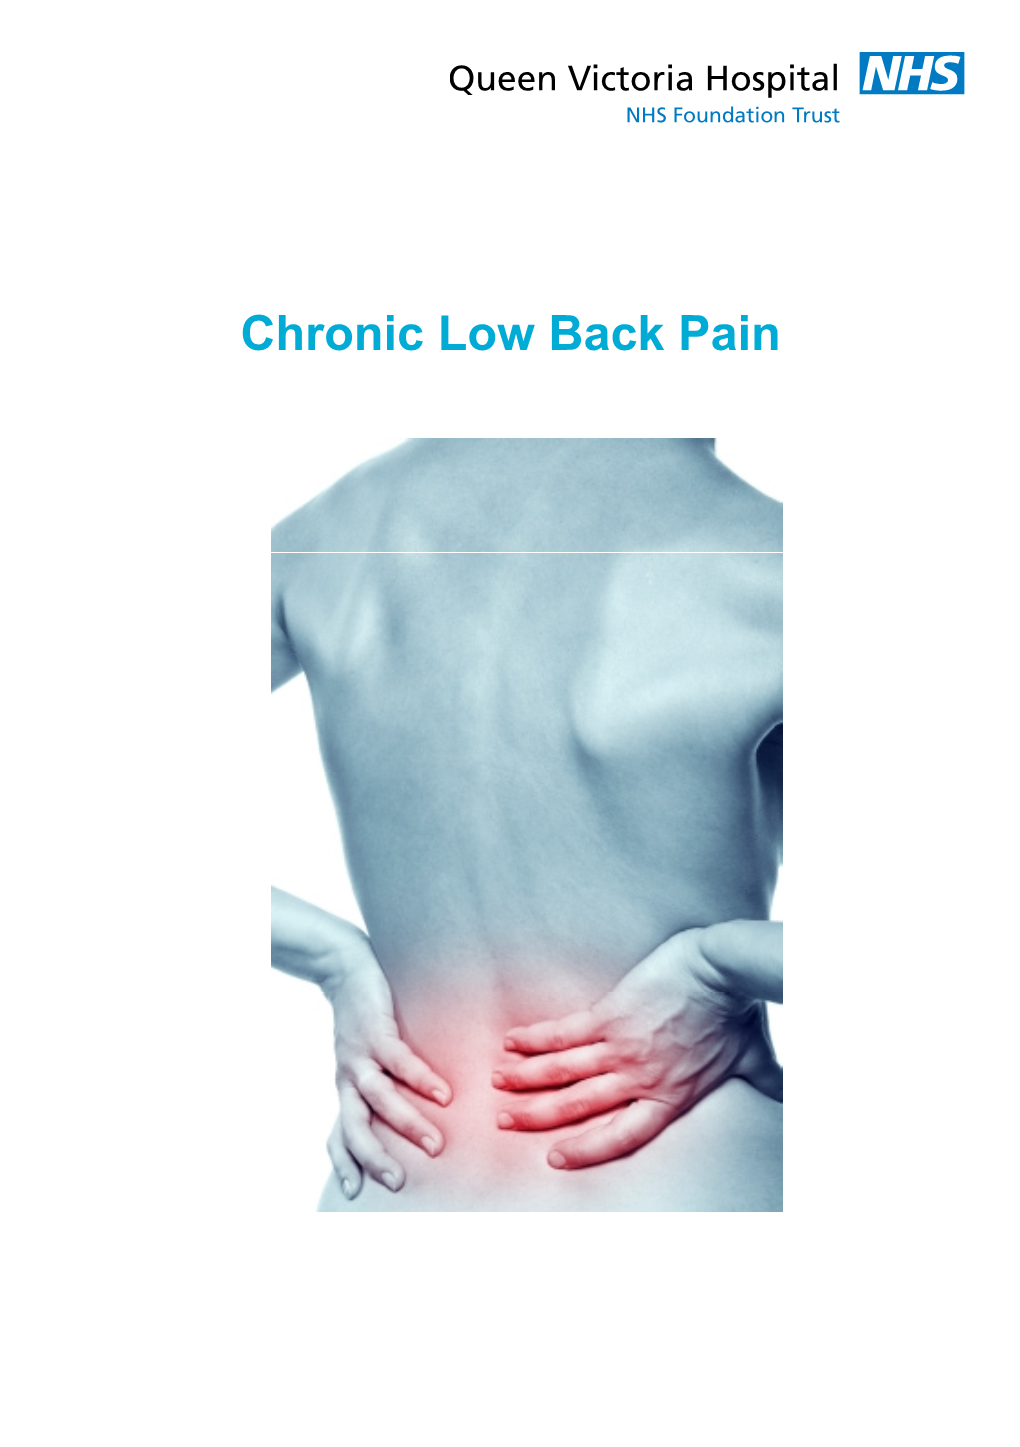 Chronic Low Back Pain This Leaflet Has Been Produced by Senior Physiotherapists Working at the Queen Victoria Hospital NHS Foundation Trust